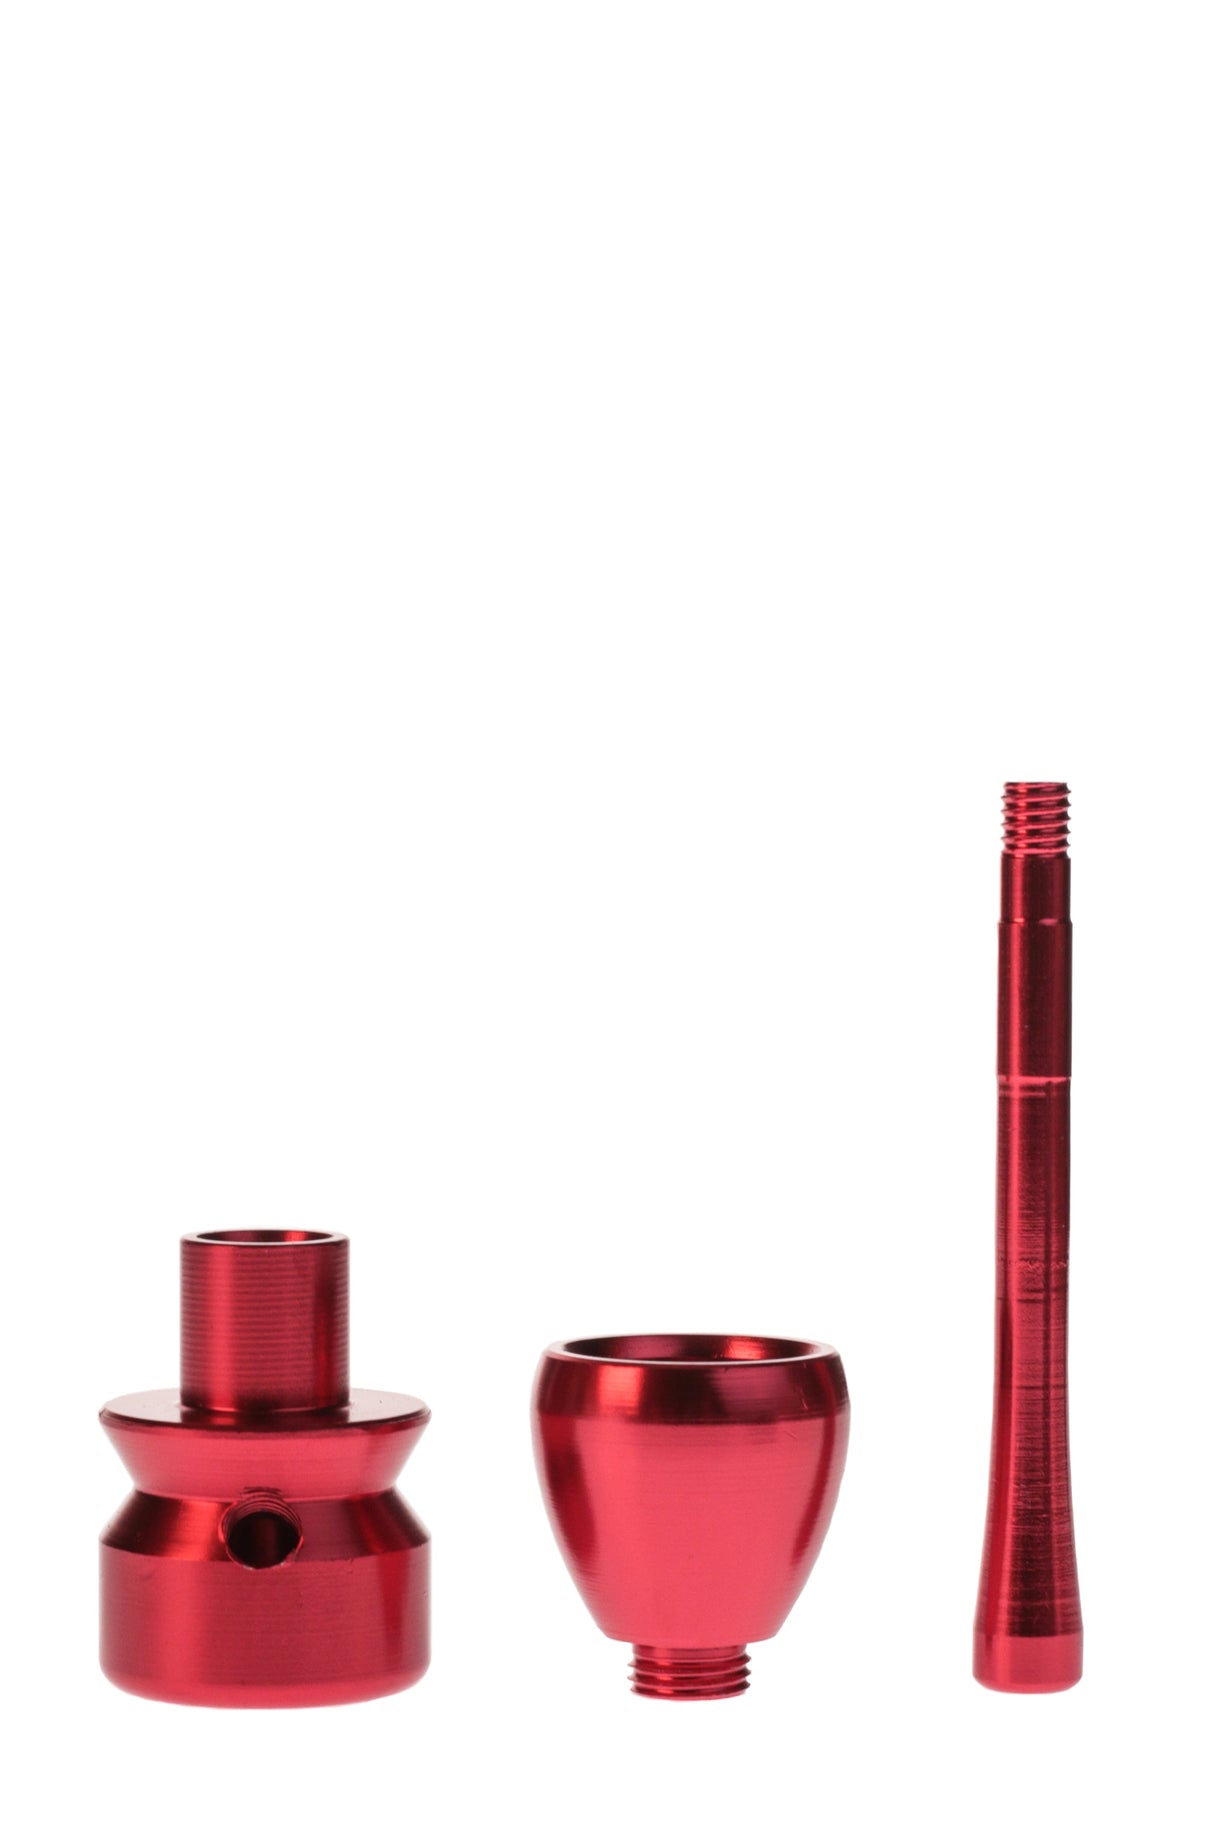 Thick Ass Glass 2.25" Red Metal Stealth Dry Pipe Disassembled View